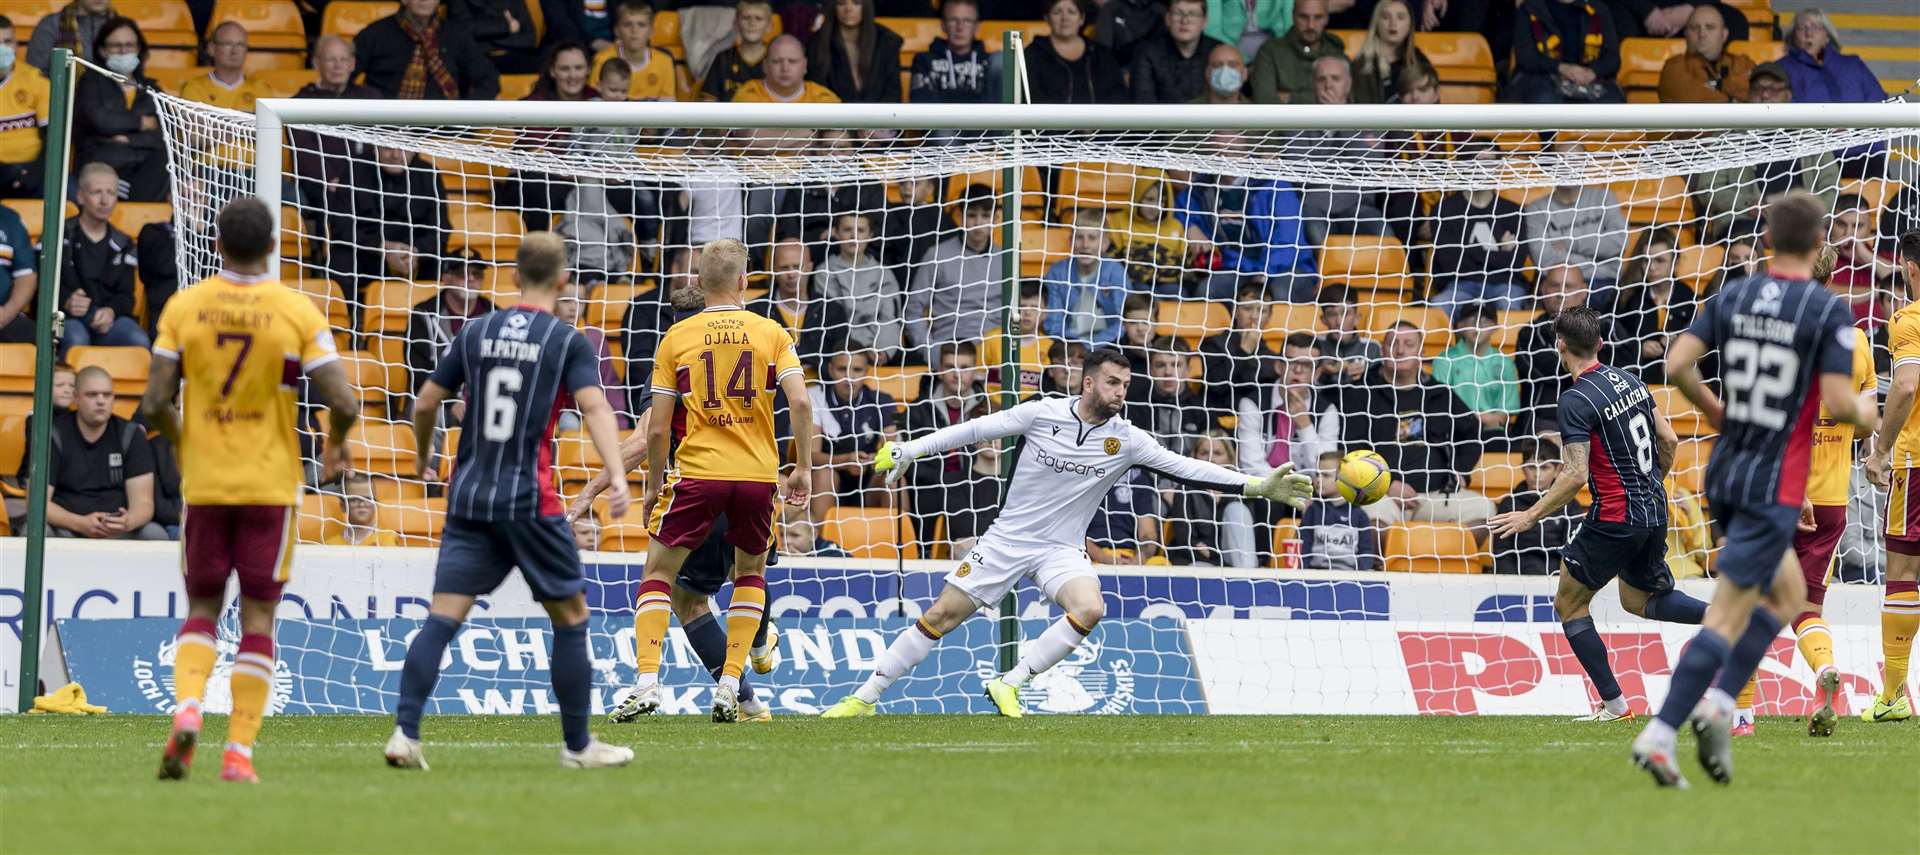 Picture - Kenny Ramsay. 25.09.2021 Motherwell v Ross County. This cross across goal from Ross County's Regan Charles-Cook goes past Motherwell 'keeper Liam Kelly for the equalising goal.